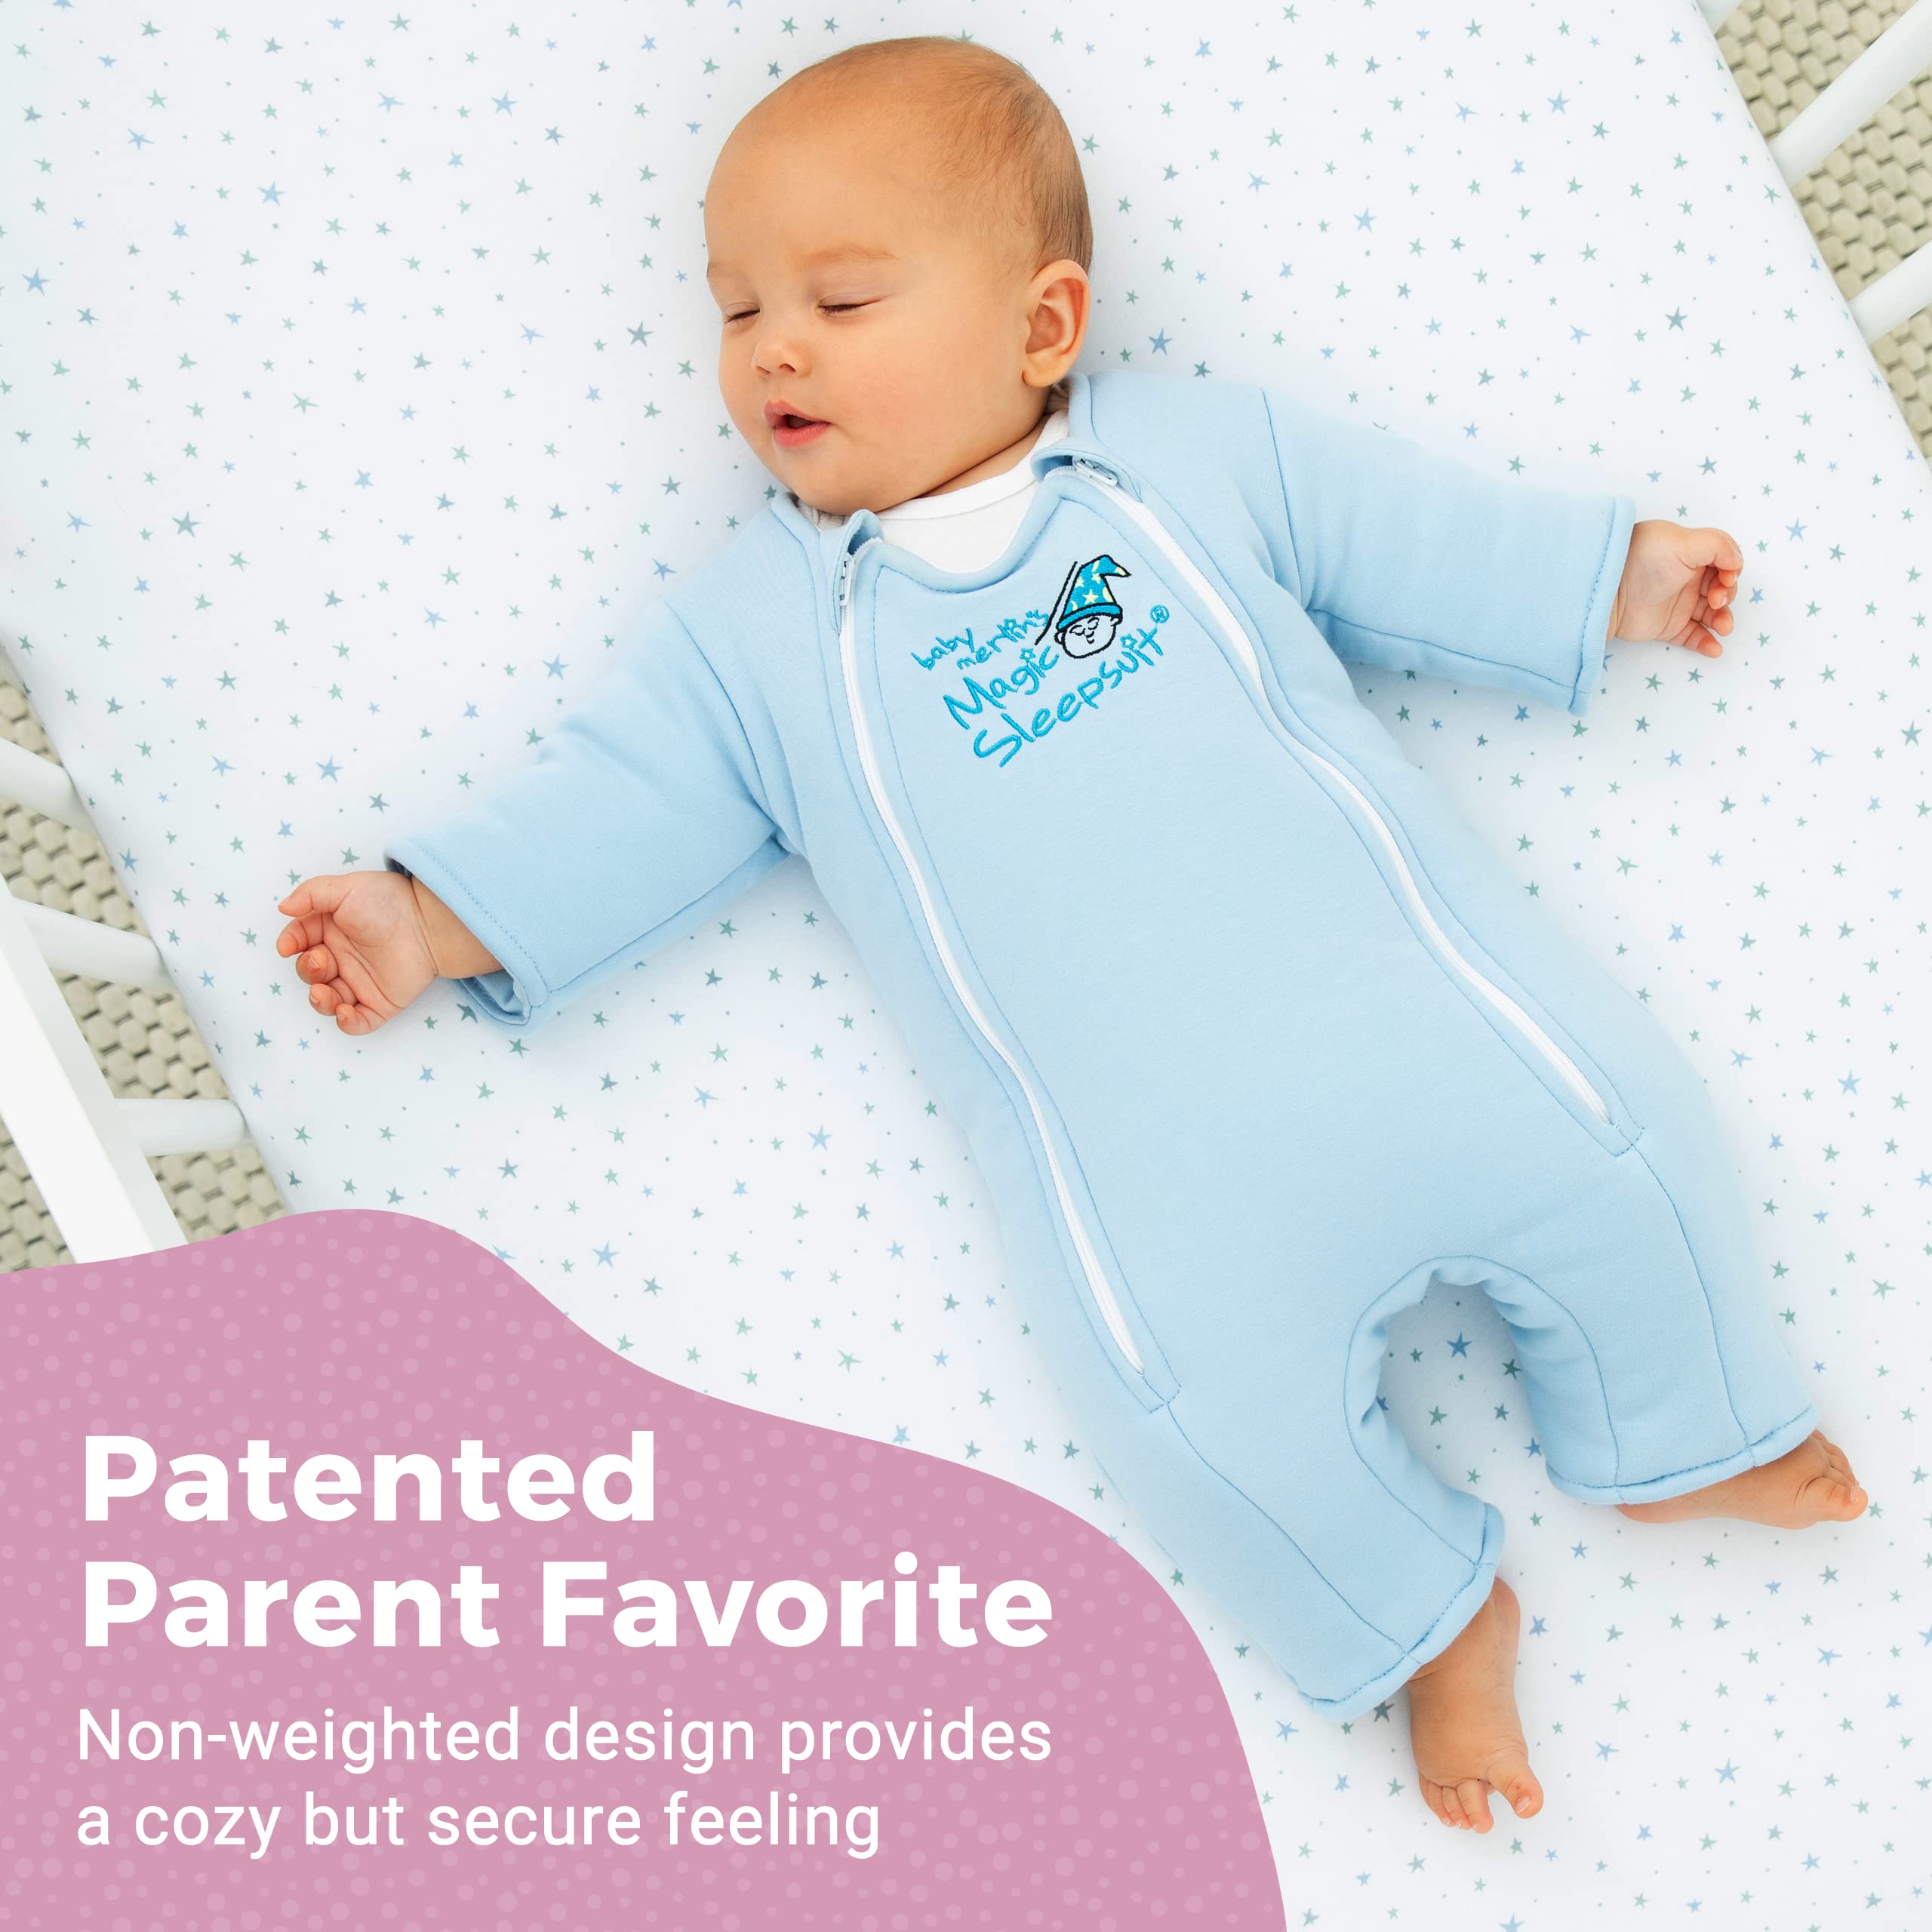 Baby Merlin's Magic Sleepsuit - 100% Cotton Baby Transition Swaddle - Baby Sleep Suit - Pink - 3-6 Months